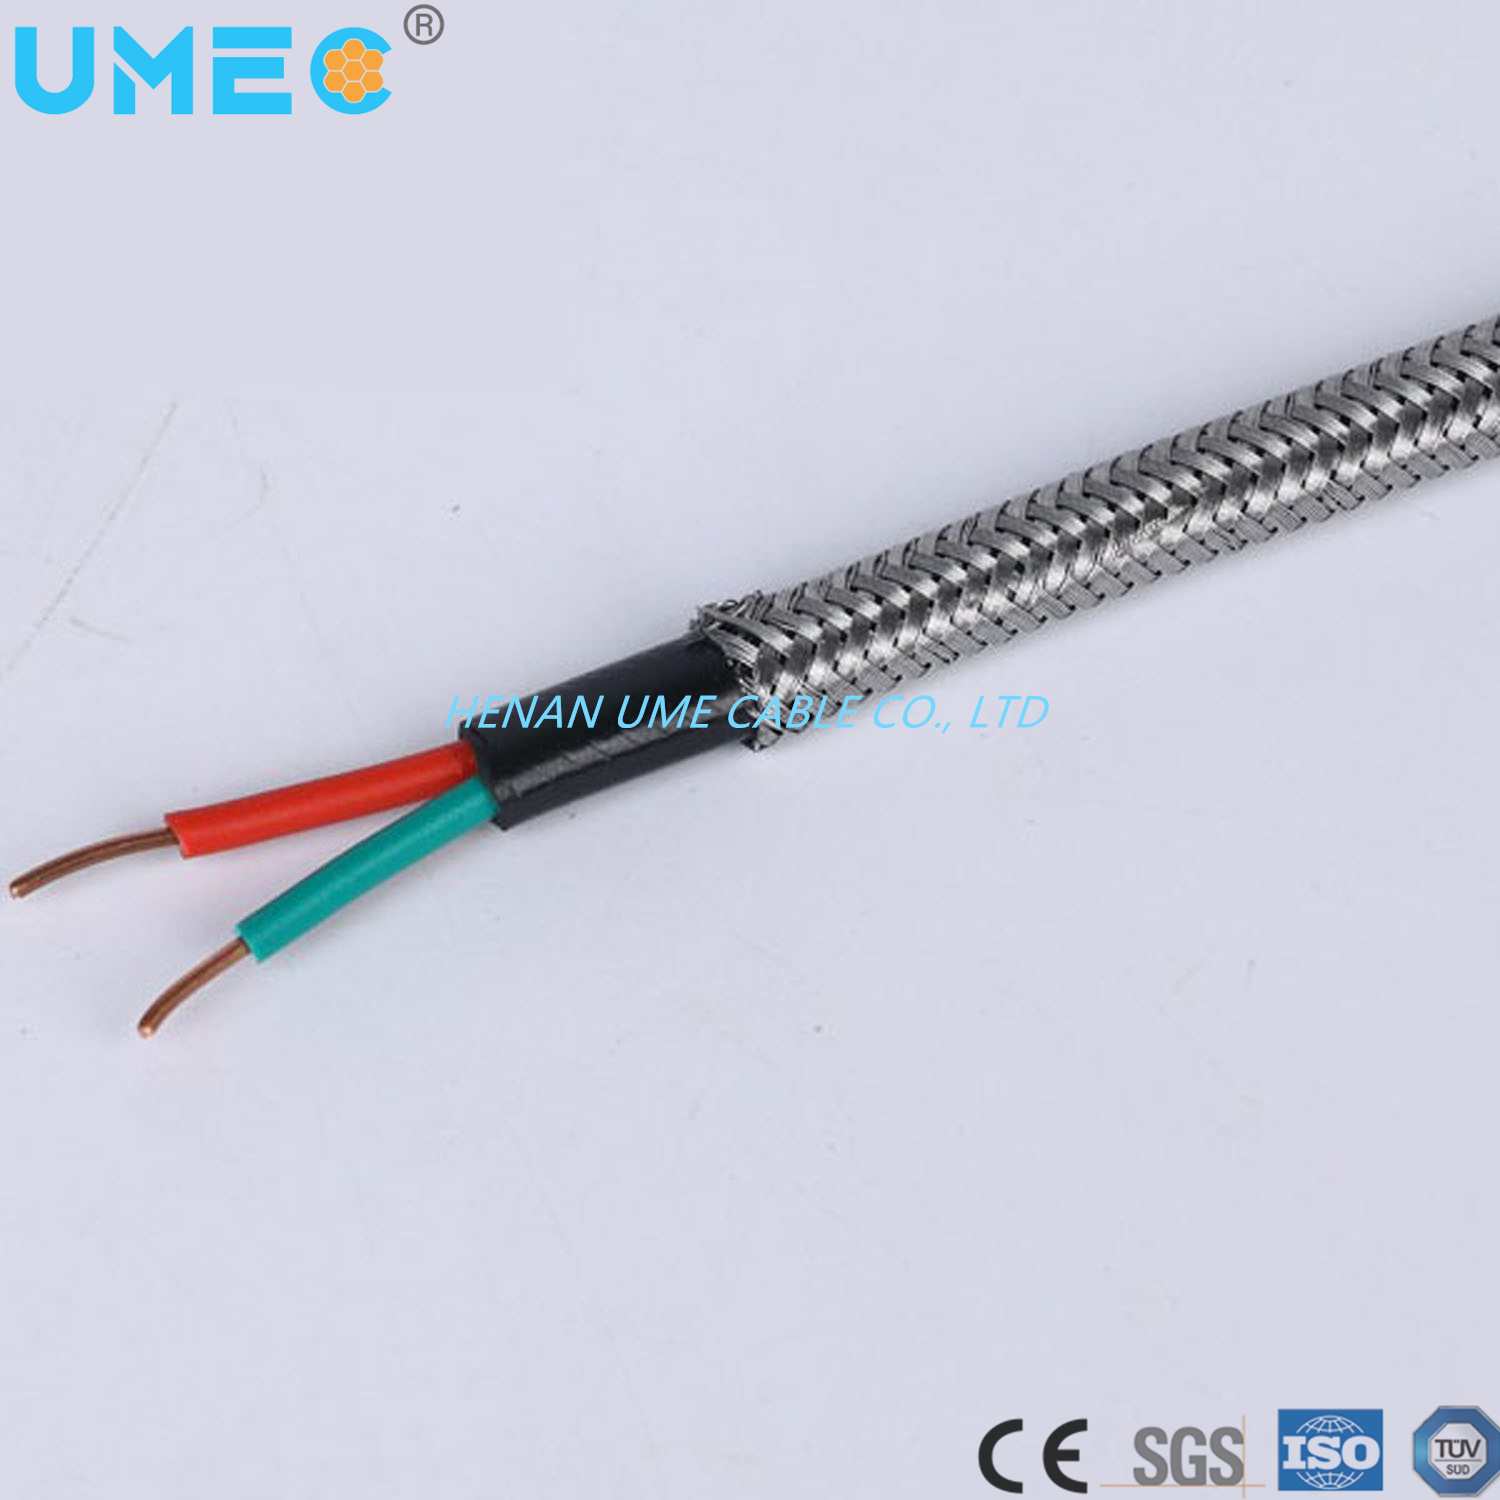 Compensational Wire & Cable for Thermocouple